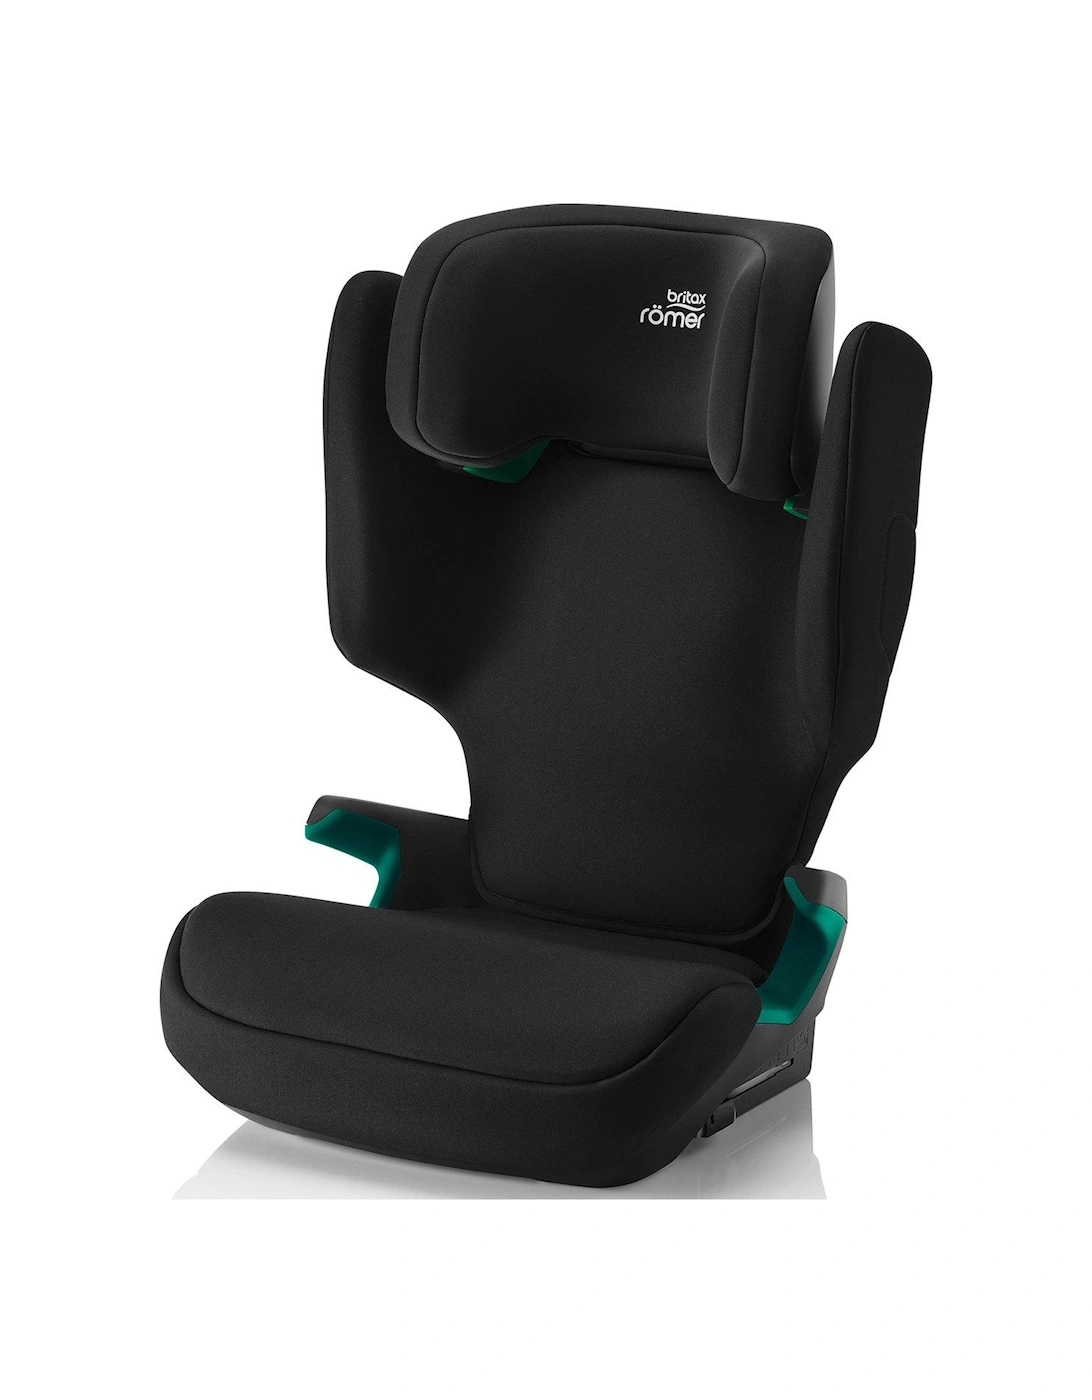 Römer Discovery Plus i-SIZE ISOFIX Car Seat 3.5 to 12 years approx Height 100 -150 cm Child Group 2/3, 2 of 1